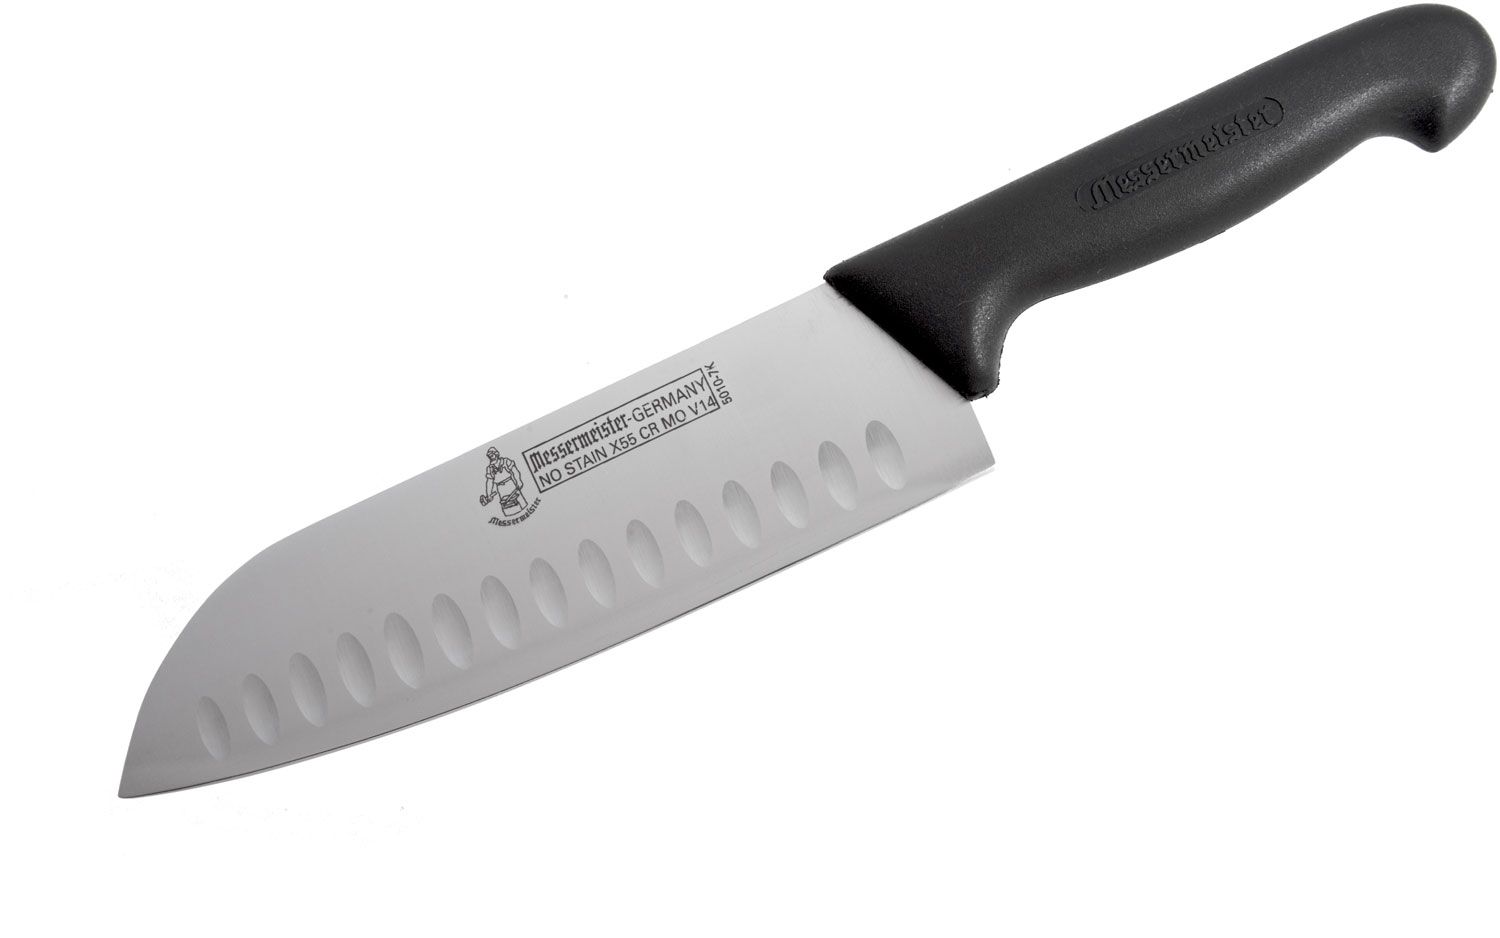 Four Seasons Wide Blade Chef's Knife 10 inch Messermeister